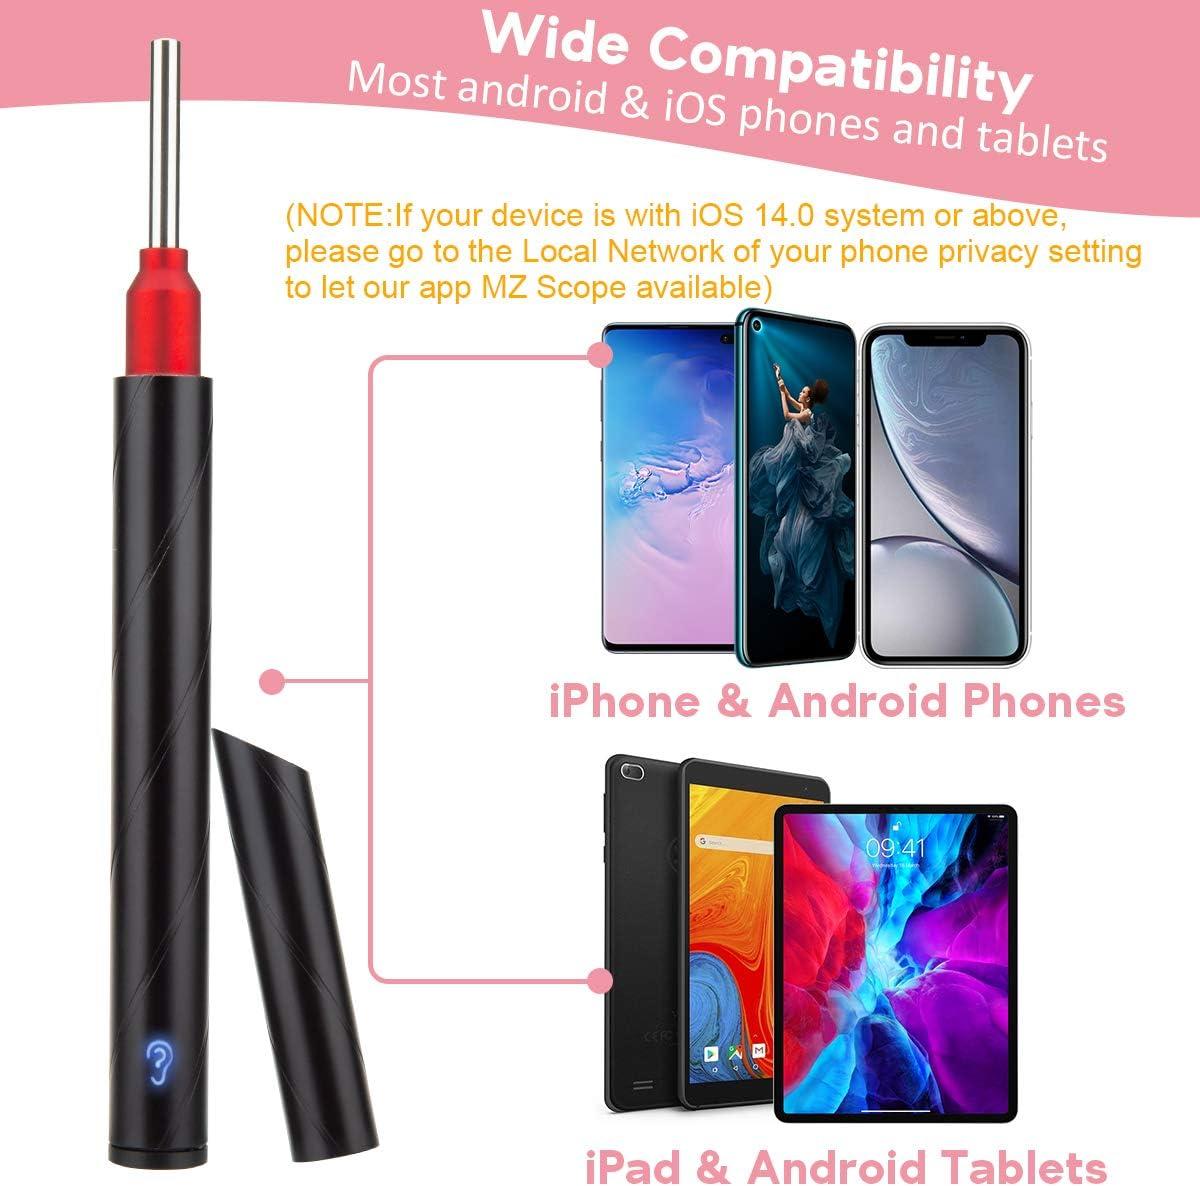 HD WiFi Otoscope Visual Ear Cleaner Camera Earwax Remover for iPhone  Android 